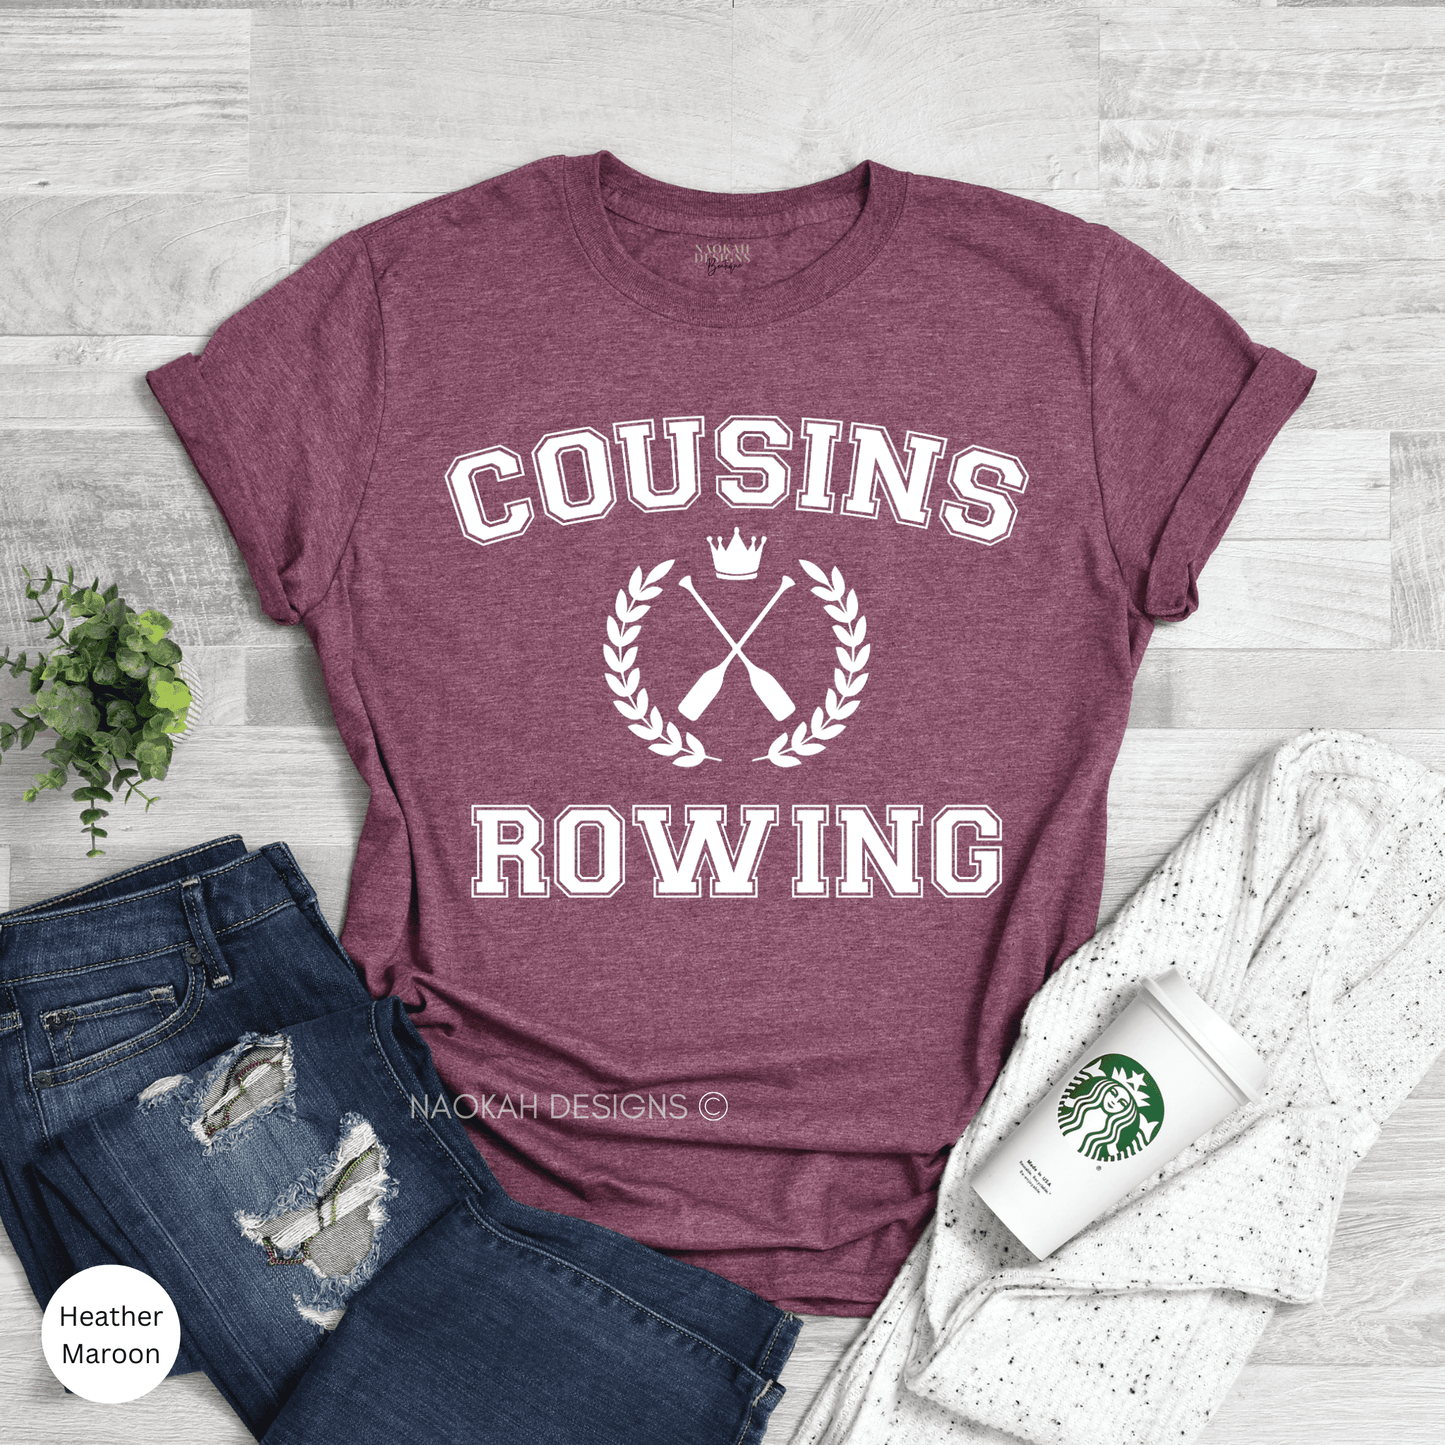 Cousins Beach Rowing shirt, The Summer I Turned Pretty Shirt, Cousin Beach T-Shirt,, Cousins Rowing Sweatshirt, Summer Cousins Beach Hoodie